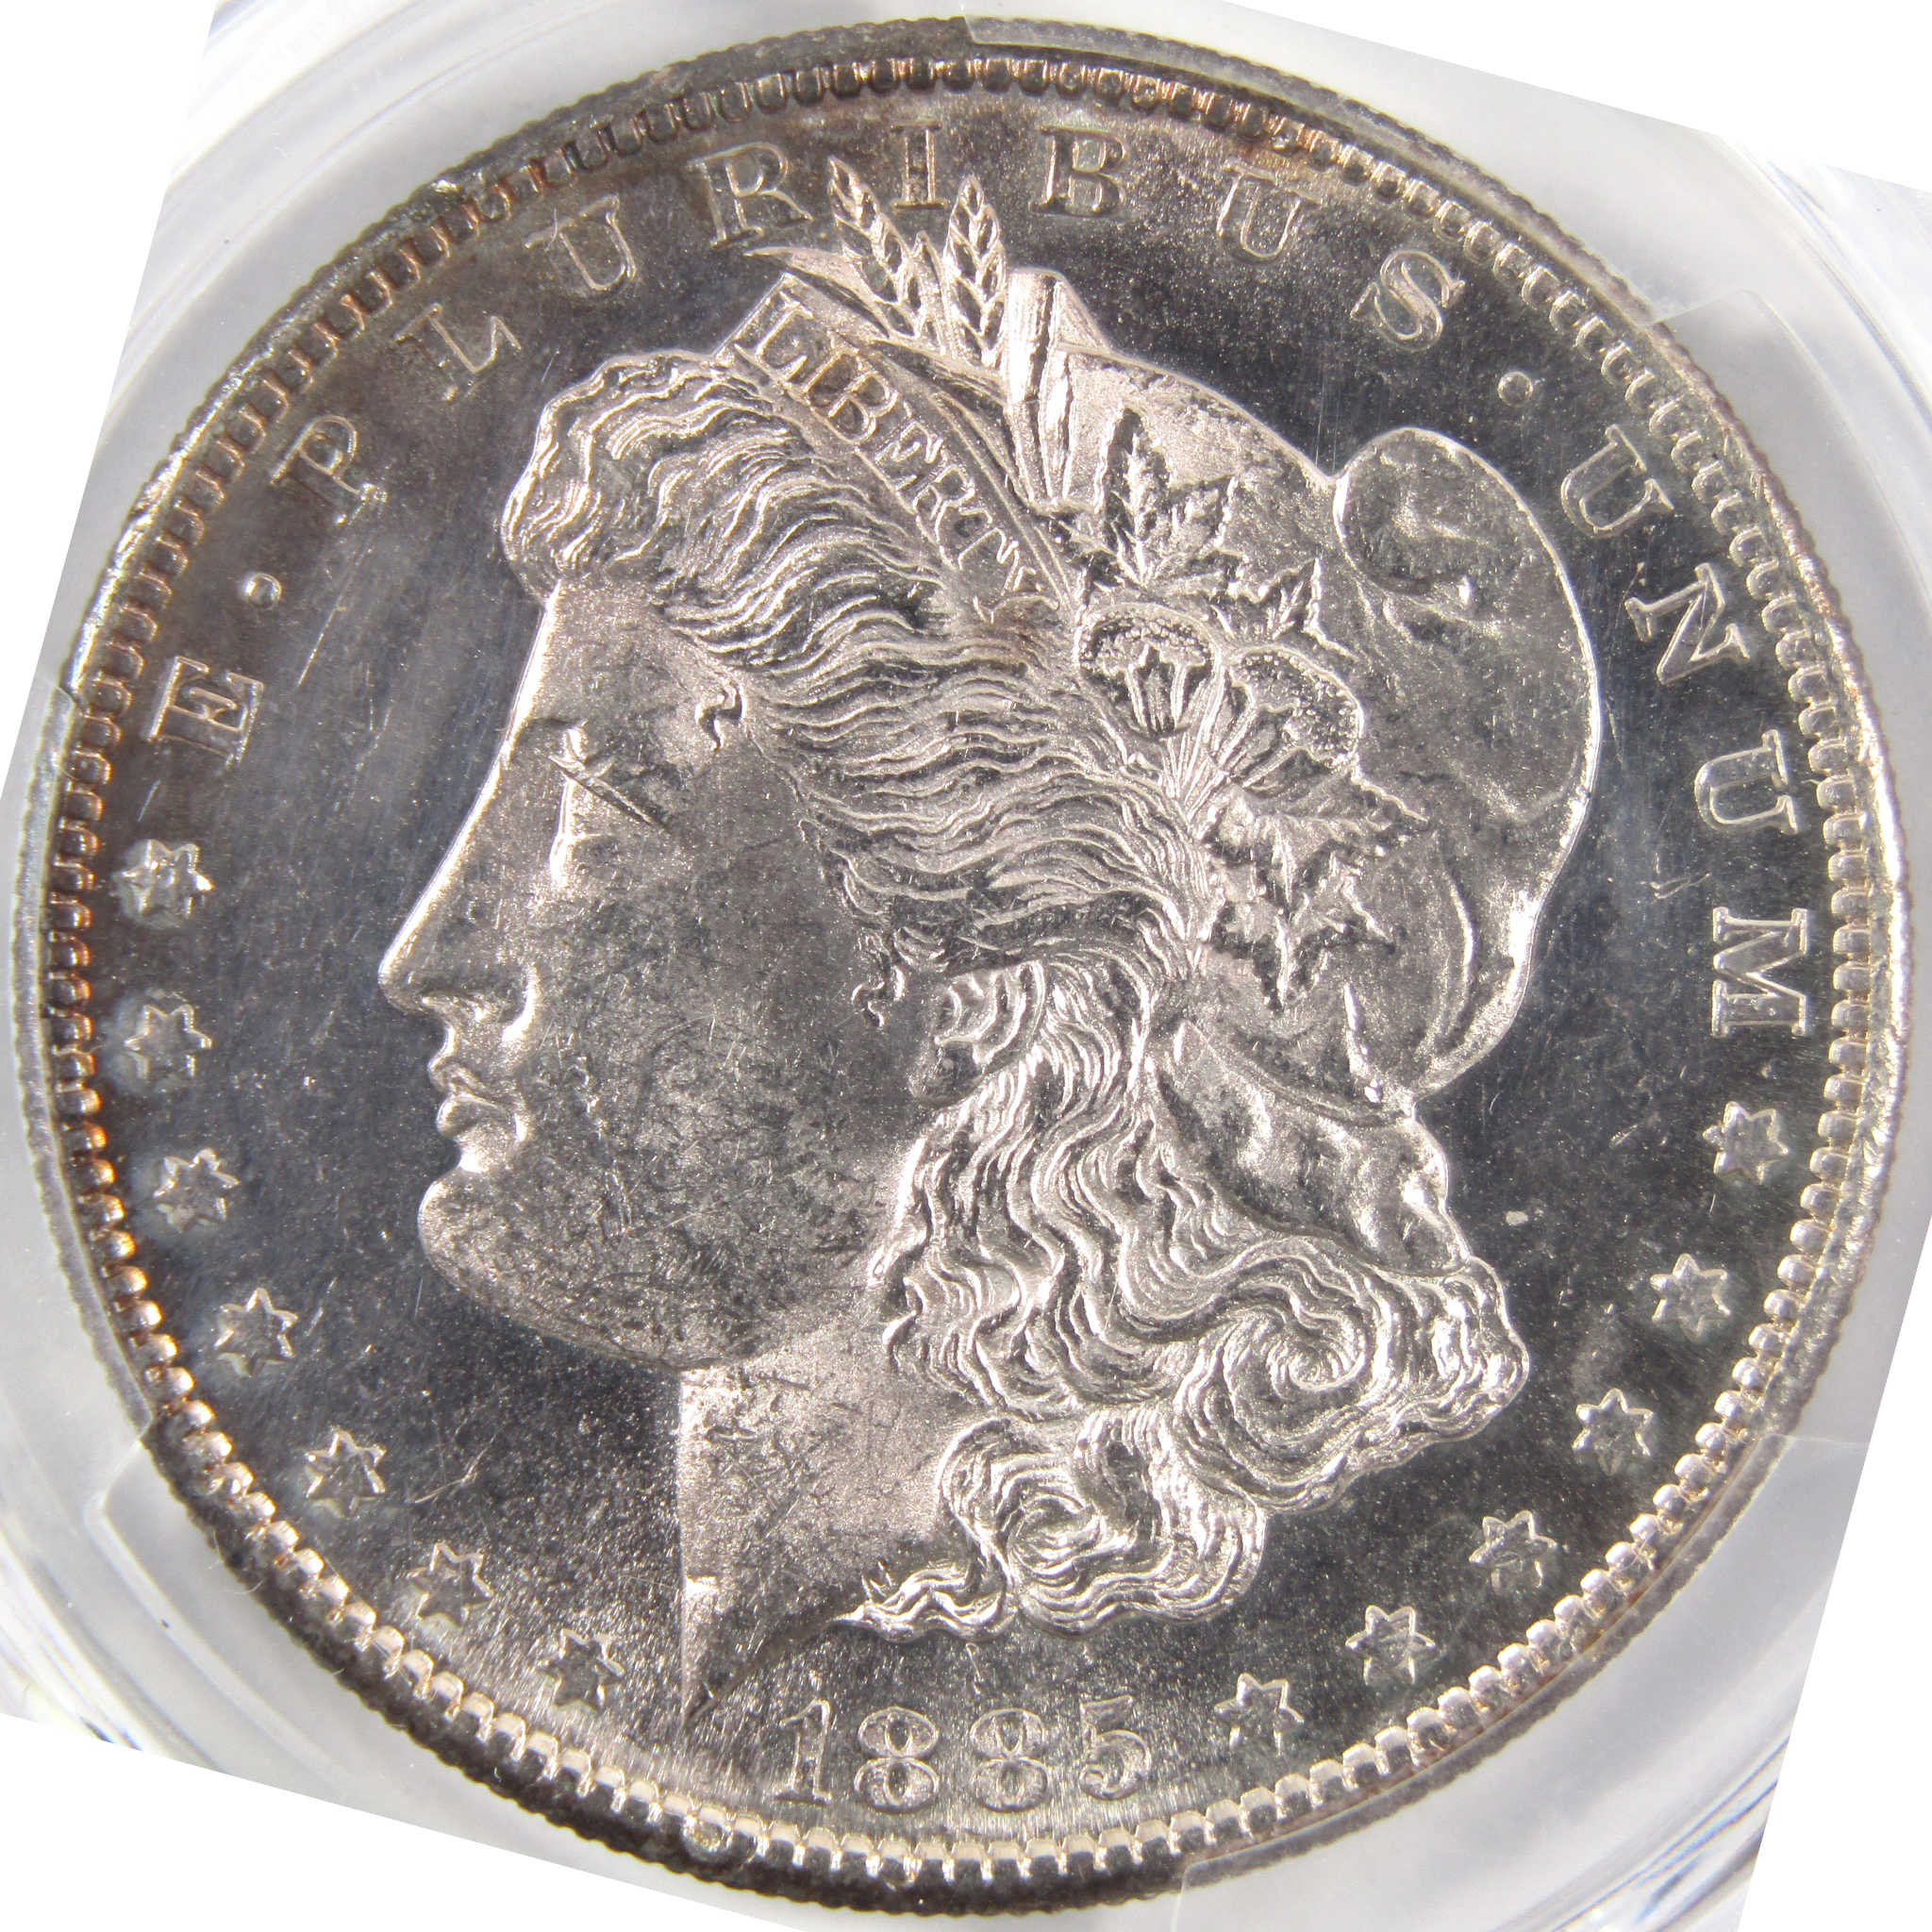 1885 S Morgan Dollar Uncirculated Details PCGS Silver $1 SKU:I9468 - Morgan coin - Morgan silver dollar - Morgan silver dollar for sale - Profile Coins &amp; Collectibles